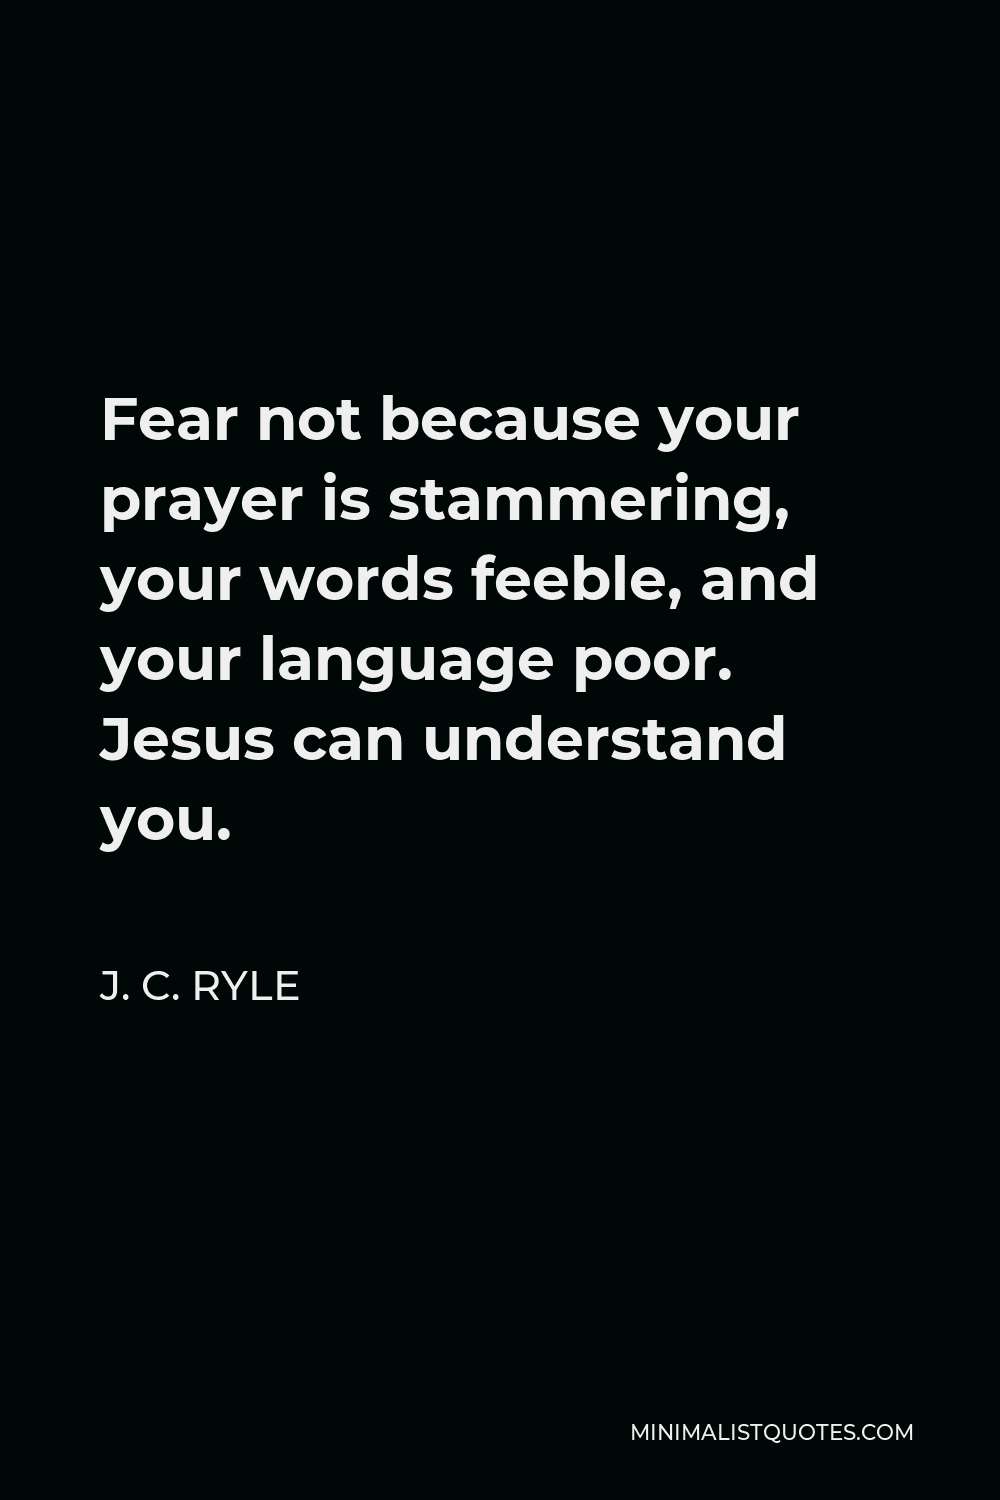 J. C. Ryle Quote - Fear not because your prayer is stammering, your words feeble, and your language poor. Jesus can understand you.